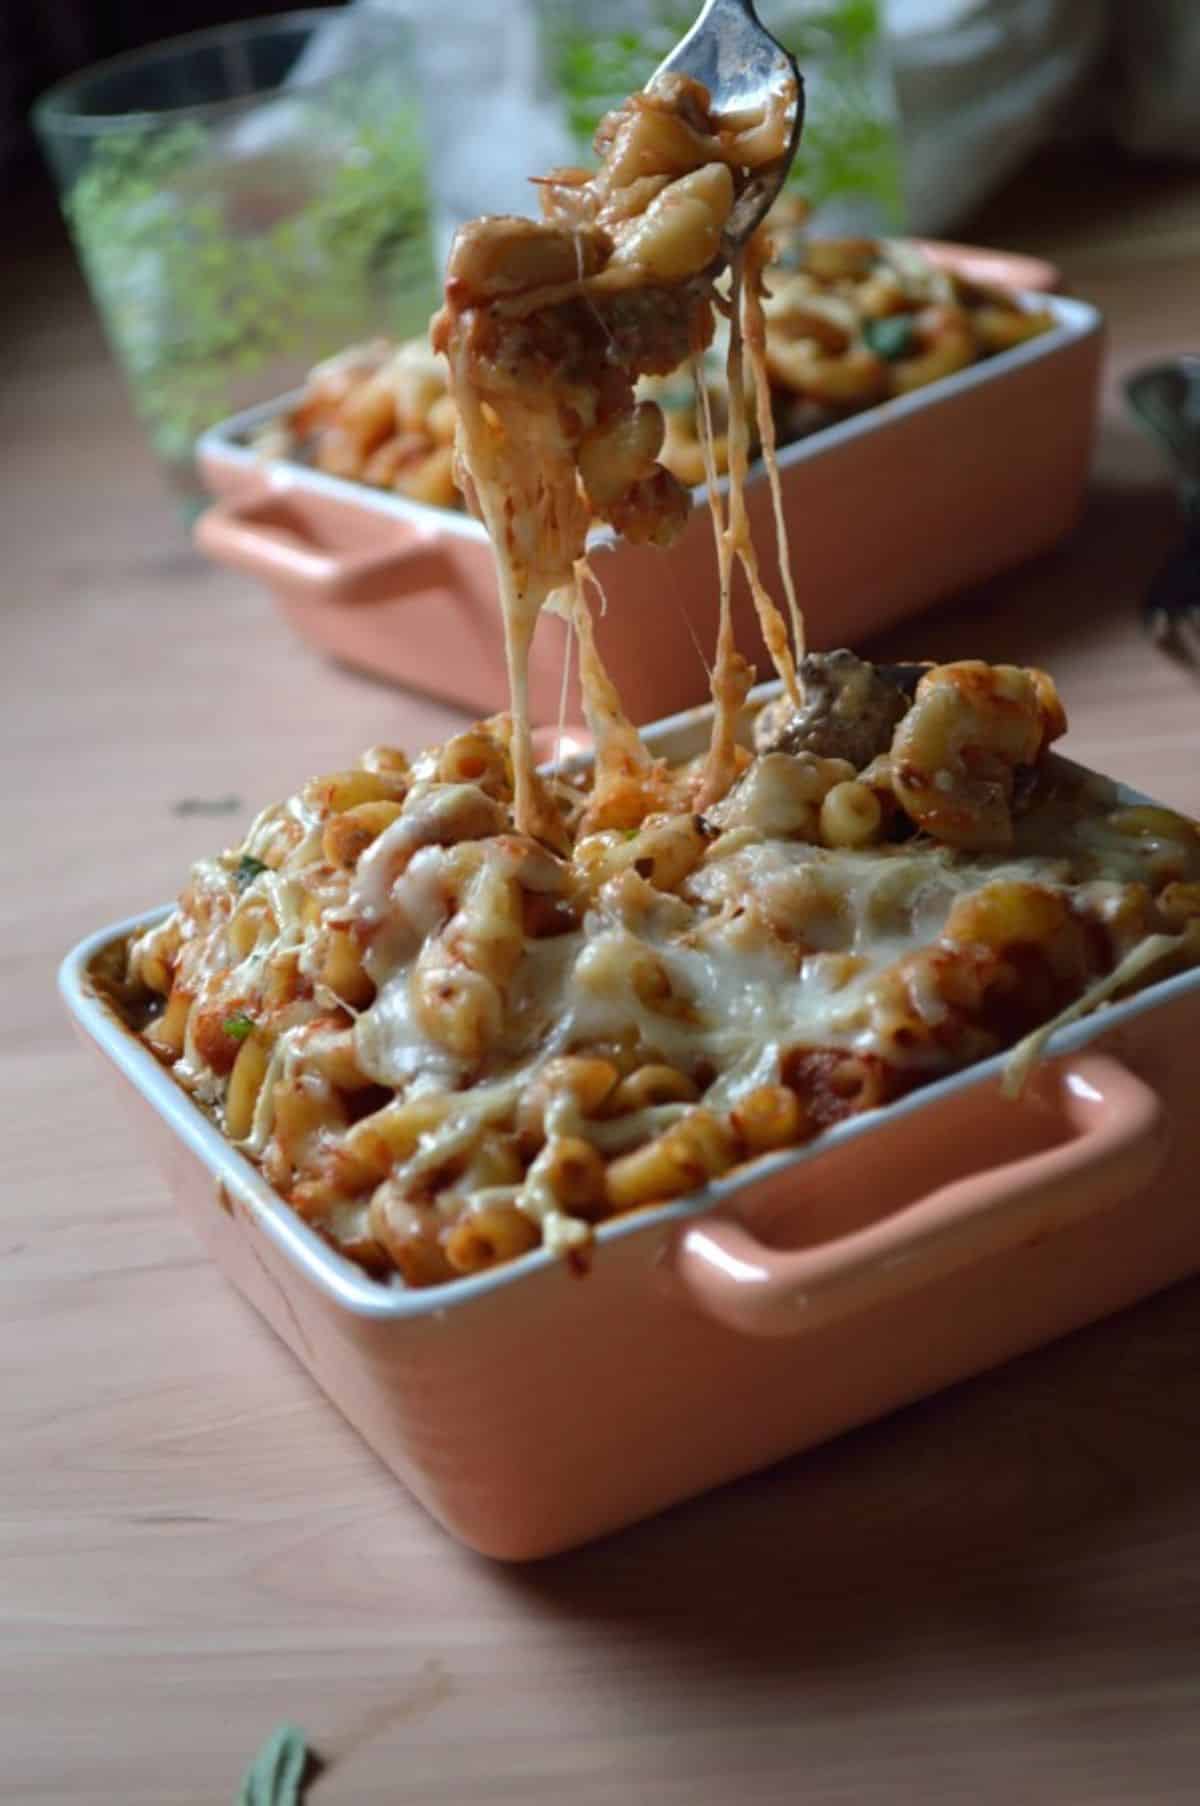 Pasta Eggplant Bake Casserole picked by a fork.